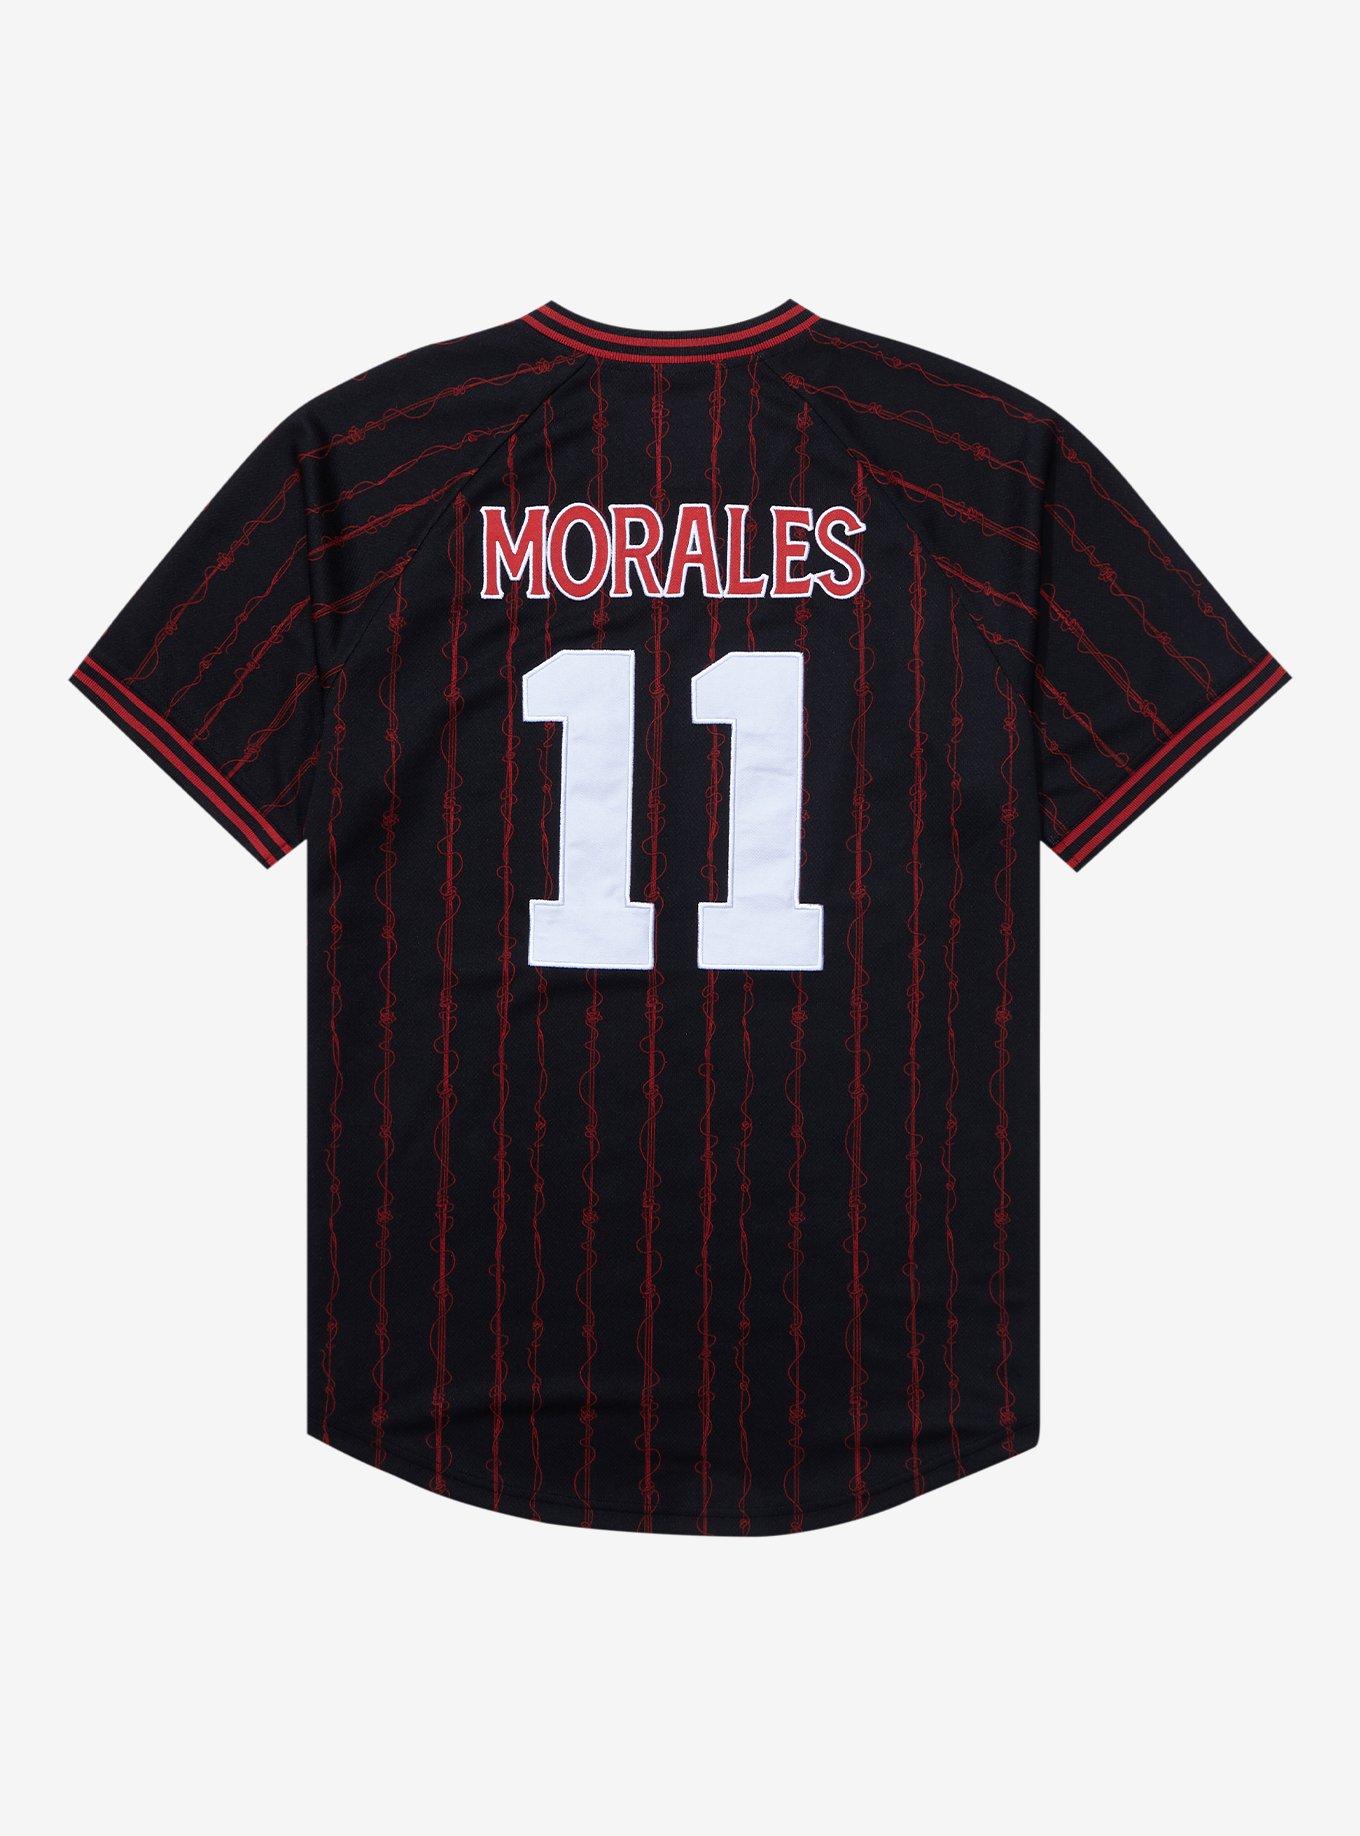 Marvel Spider-Man Miles Morales Soccer Jersey - BoxLunch Exclusive, , hi-res